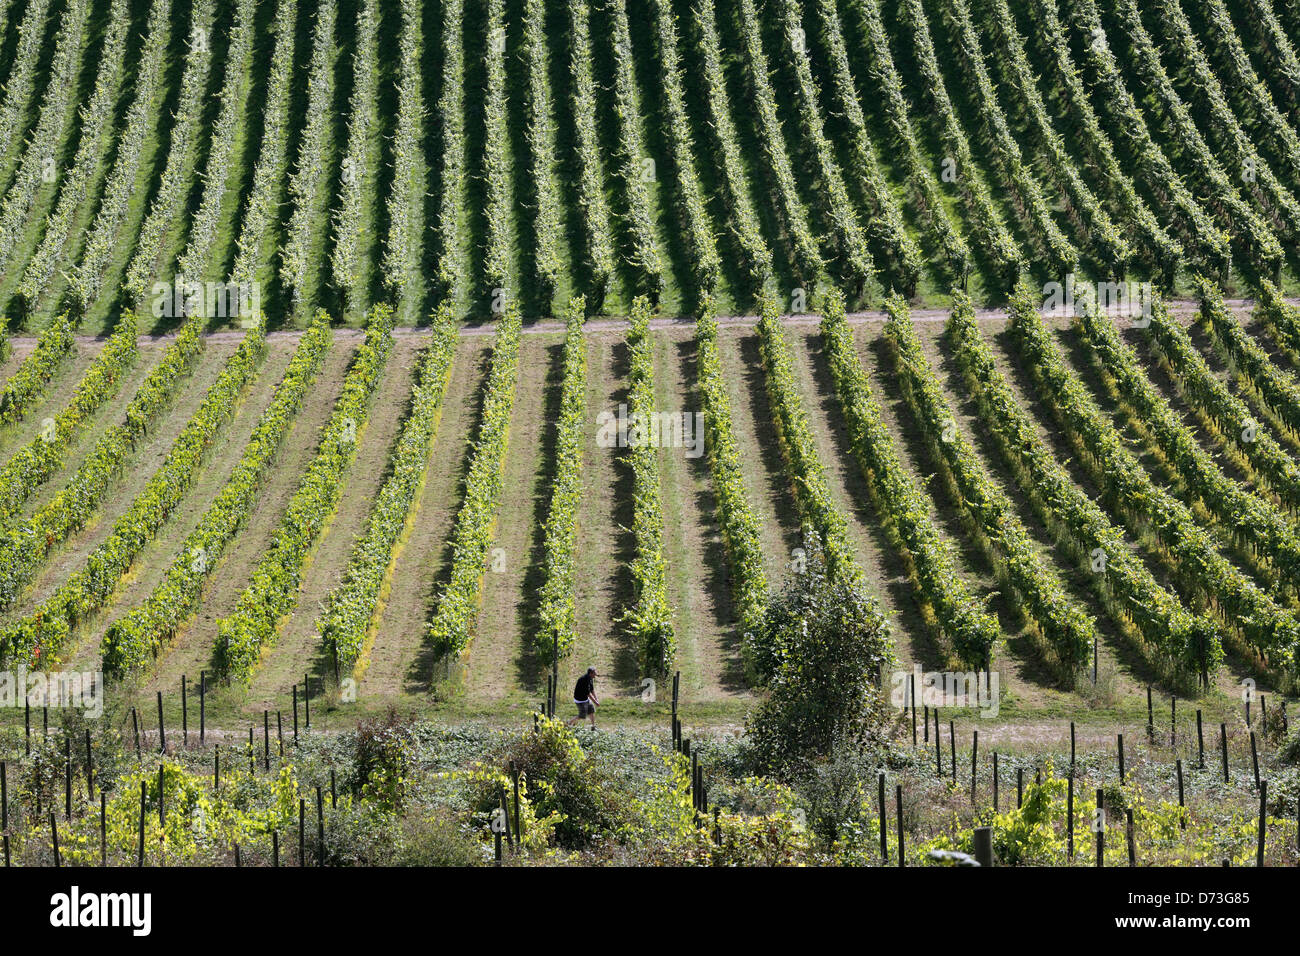 Part of a vineyard on the North Downs near Dorking, Surrey, England. Stock Photo